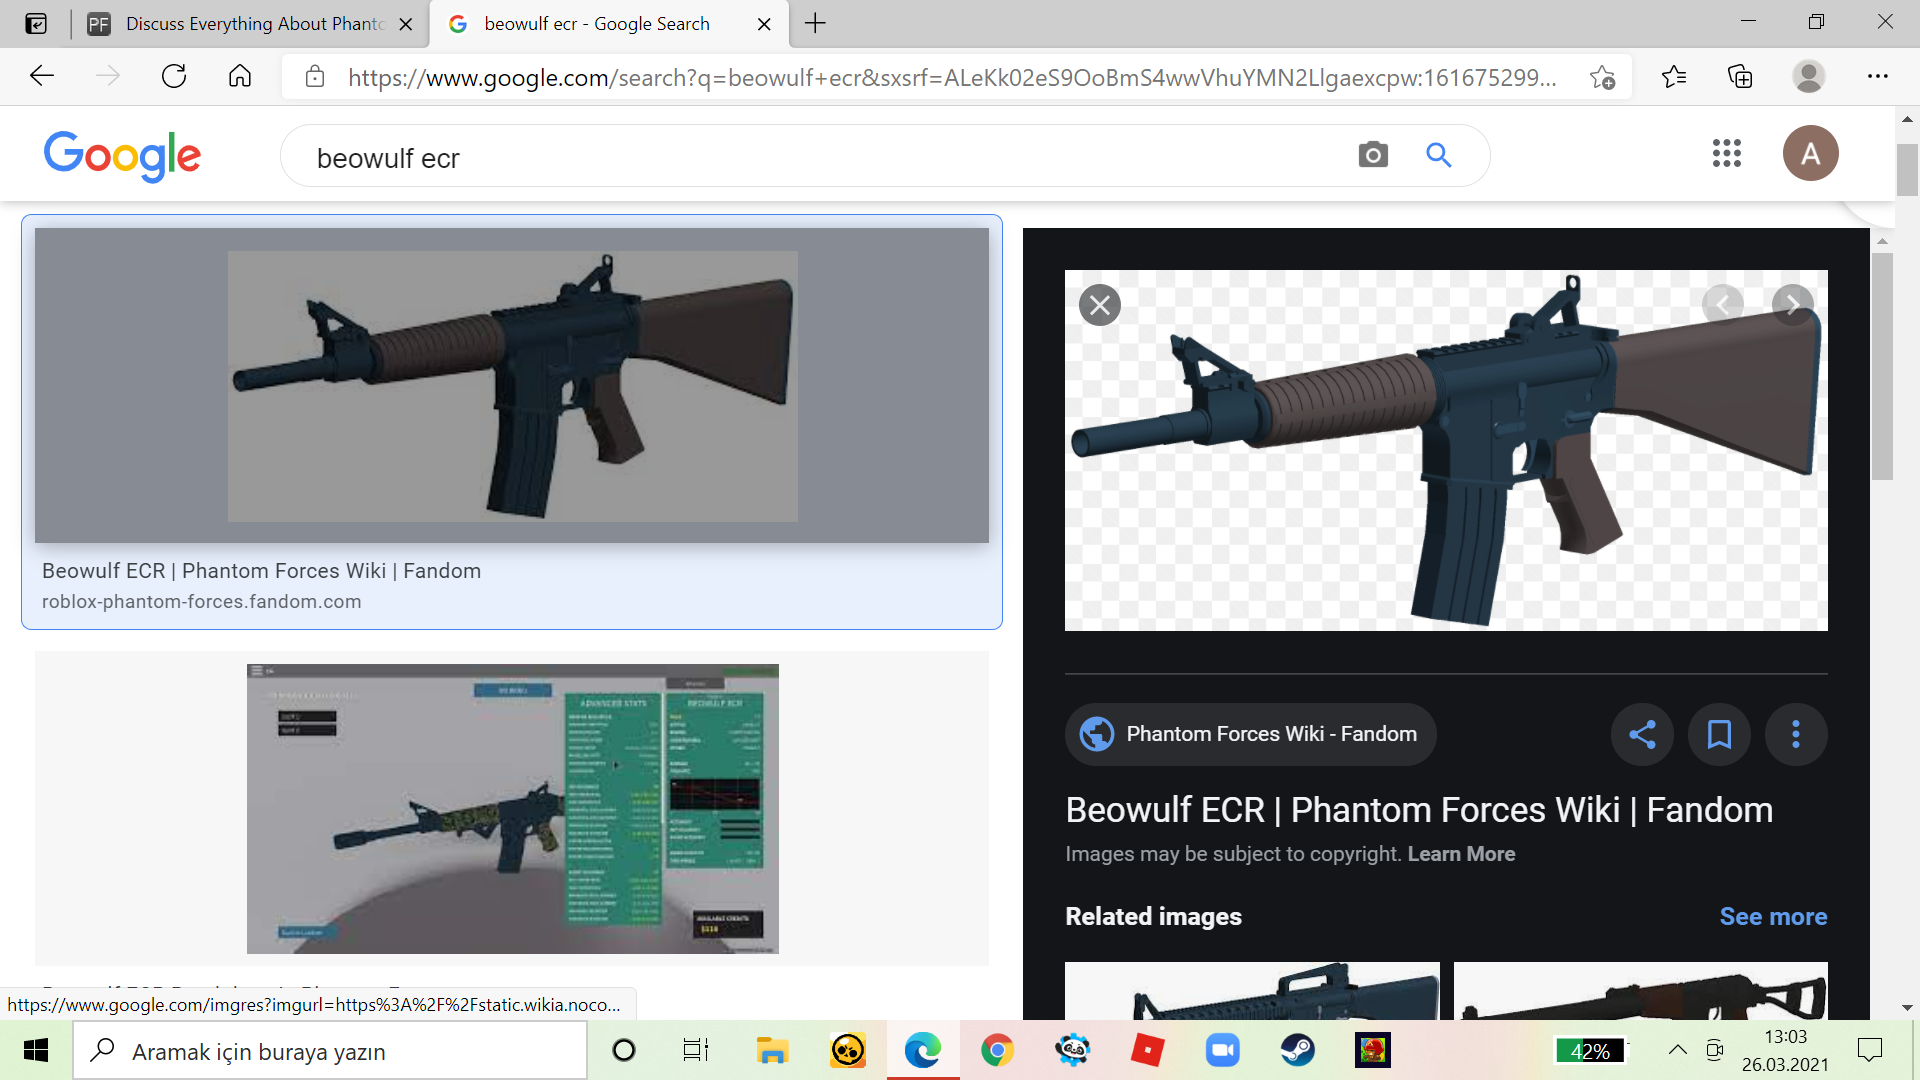 Discuss Everything About Phantom Forces Wiki